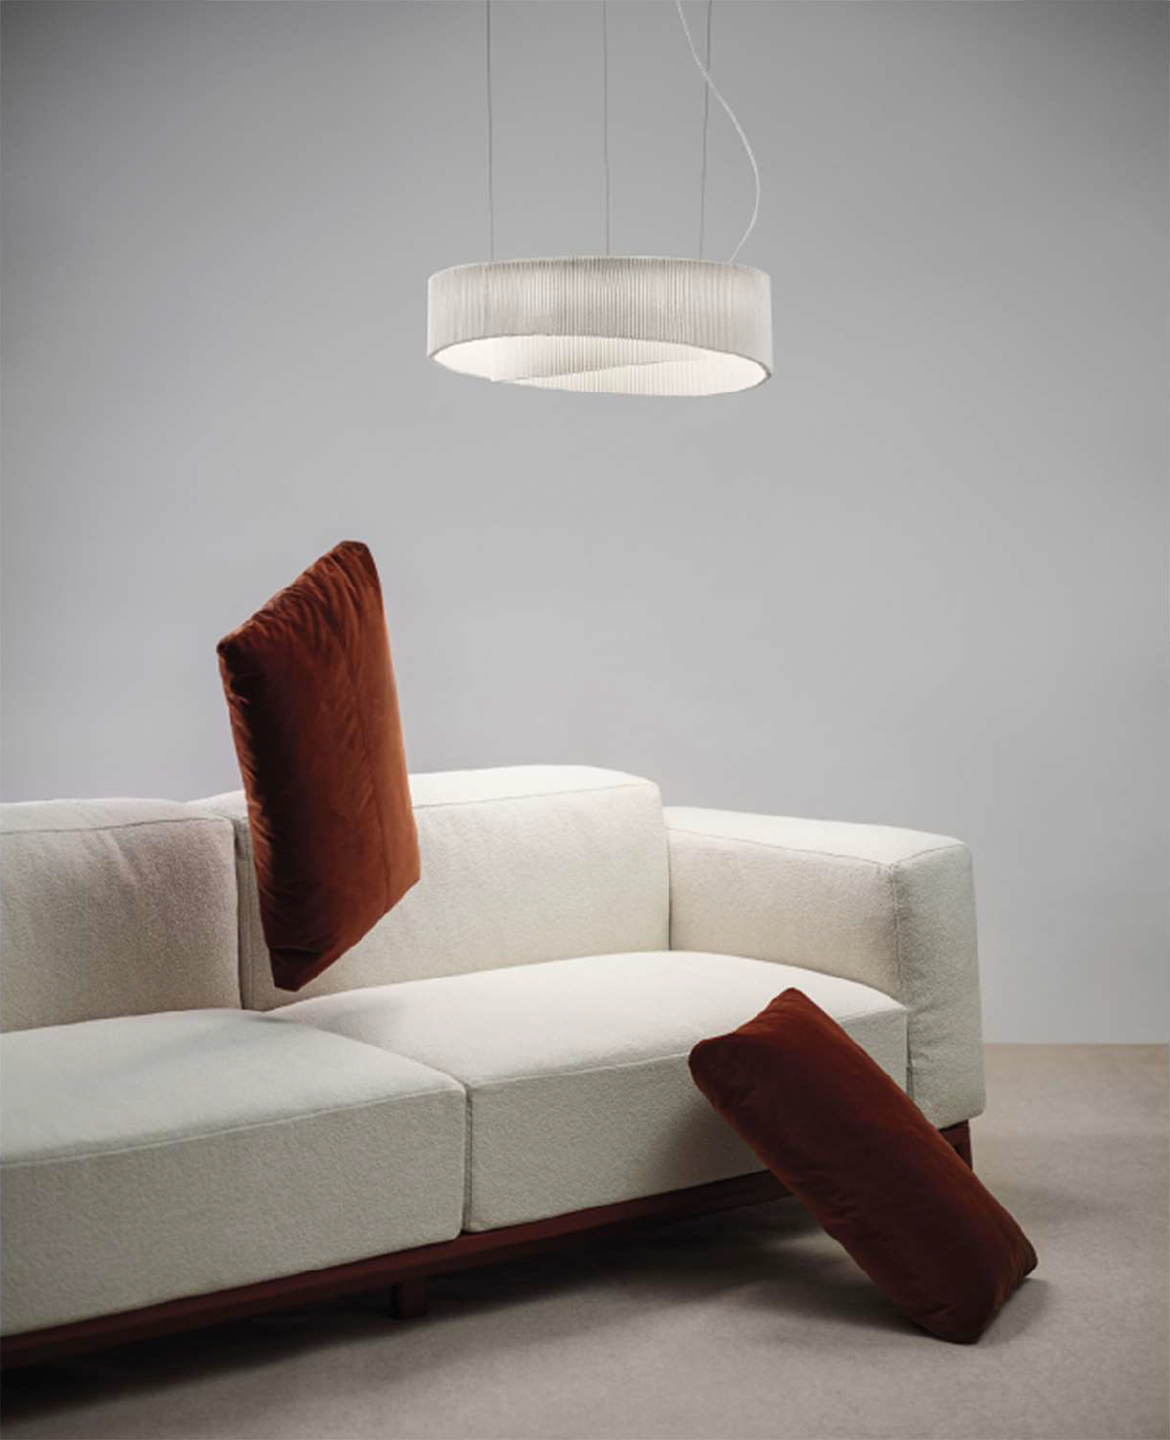 New-York-Design-Center-WNWN-Calger-Lighting-The-Anel-Collection-Gallery-1